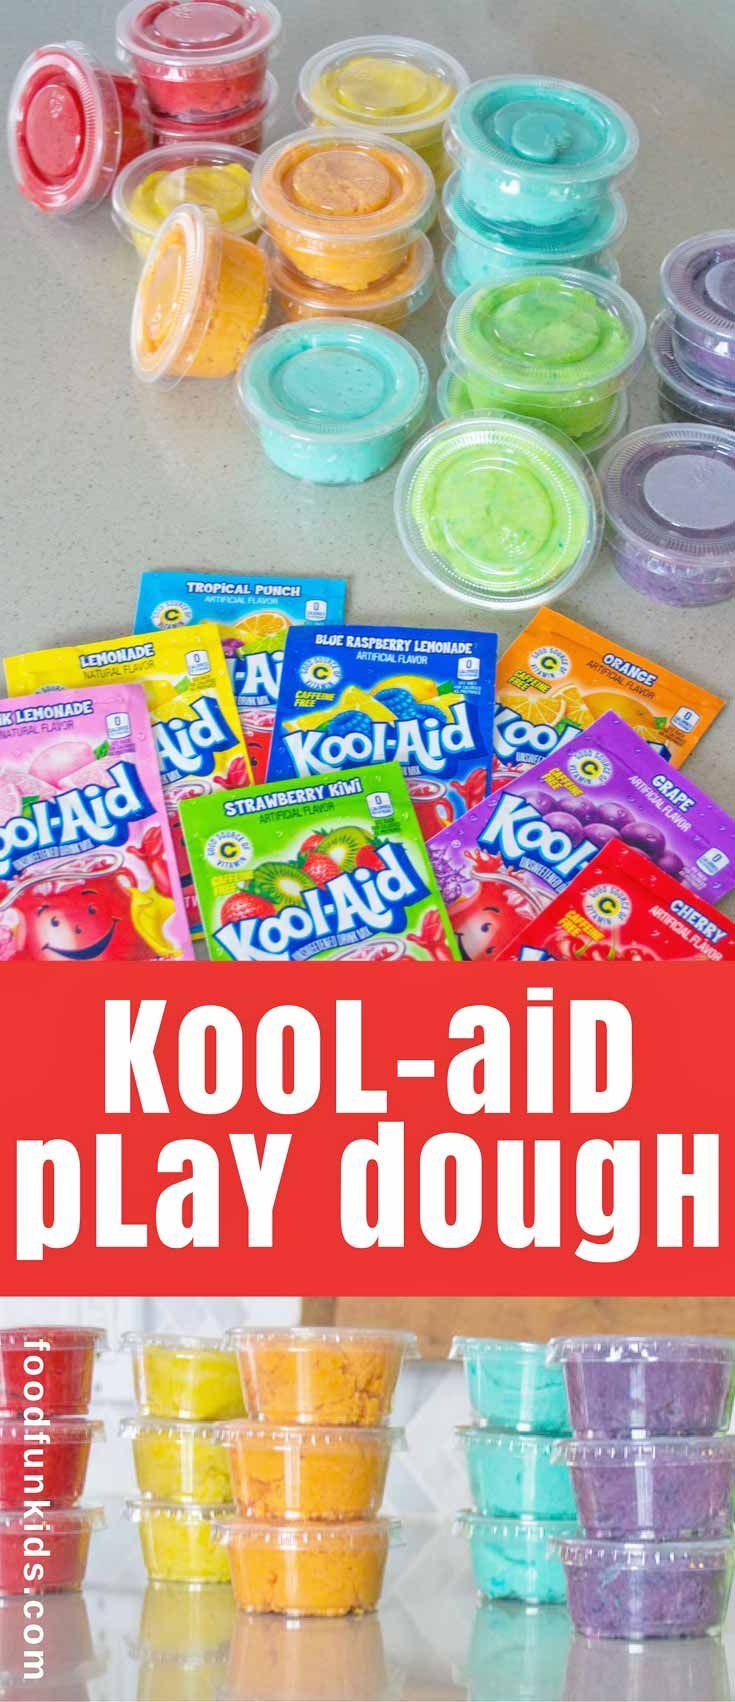 Kool-Aid Playdough -   25 crafts projects things to
 ideas